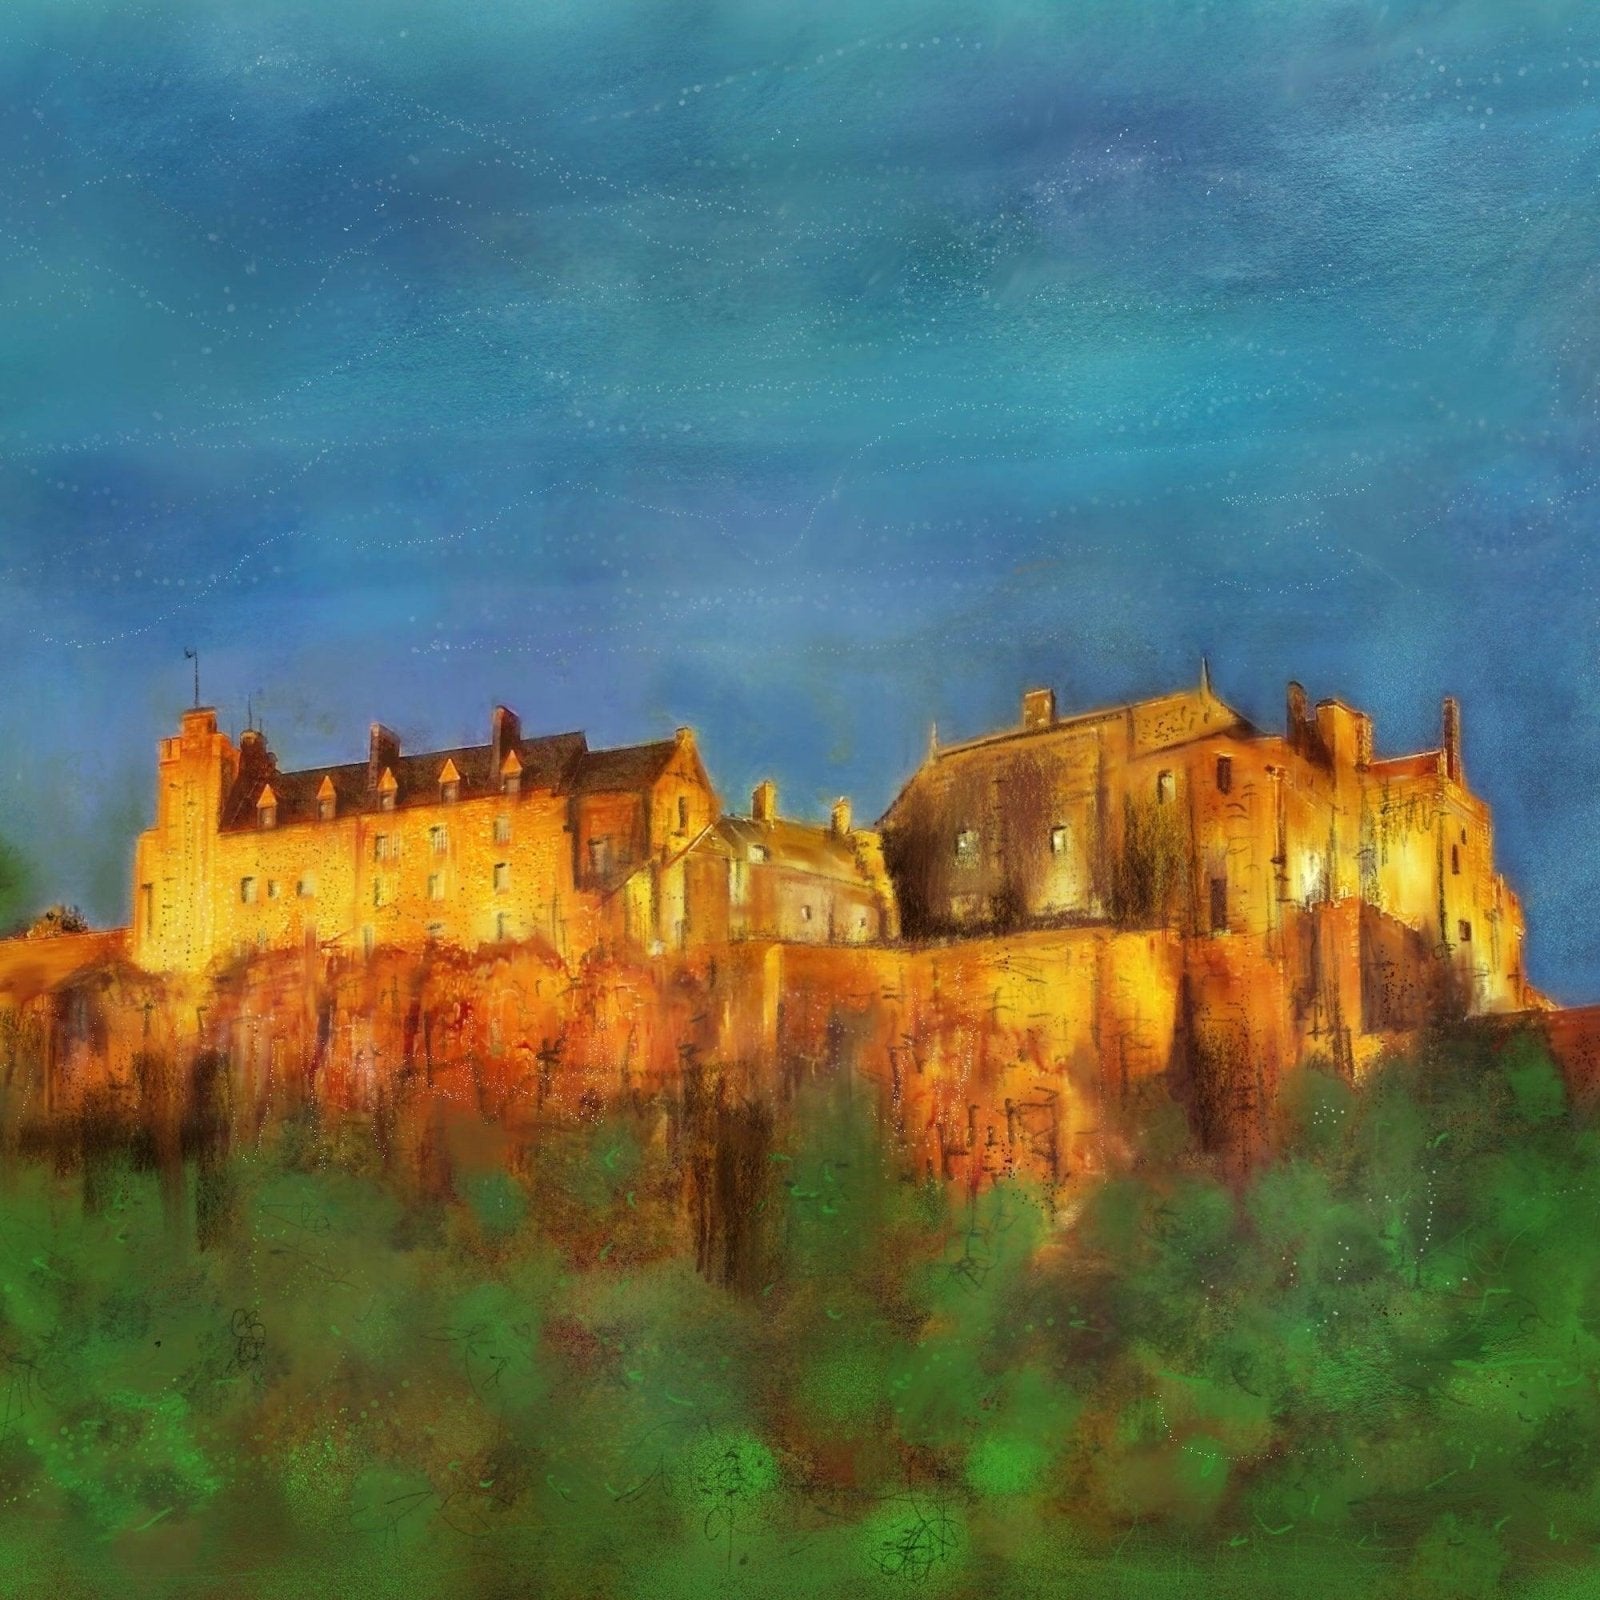 Stirling Castle Sunset Wooden Art Block-Wooden Art Blocks-Historic & Iconic Scotland Art Gallery-Paintings, Prints, Homeware, Art Gifts From Scotland By Scottish Artist Kevin Hunter